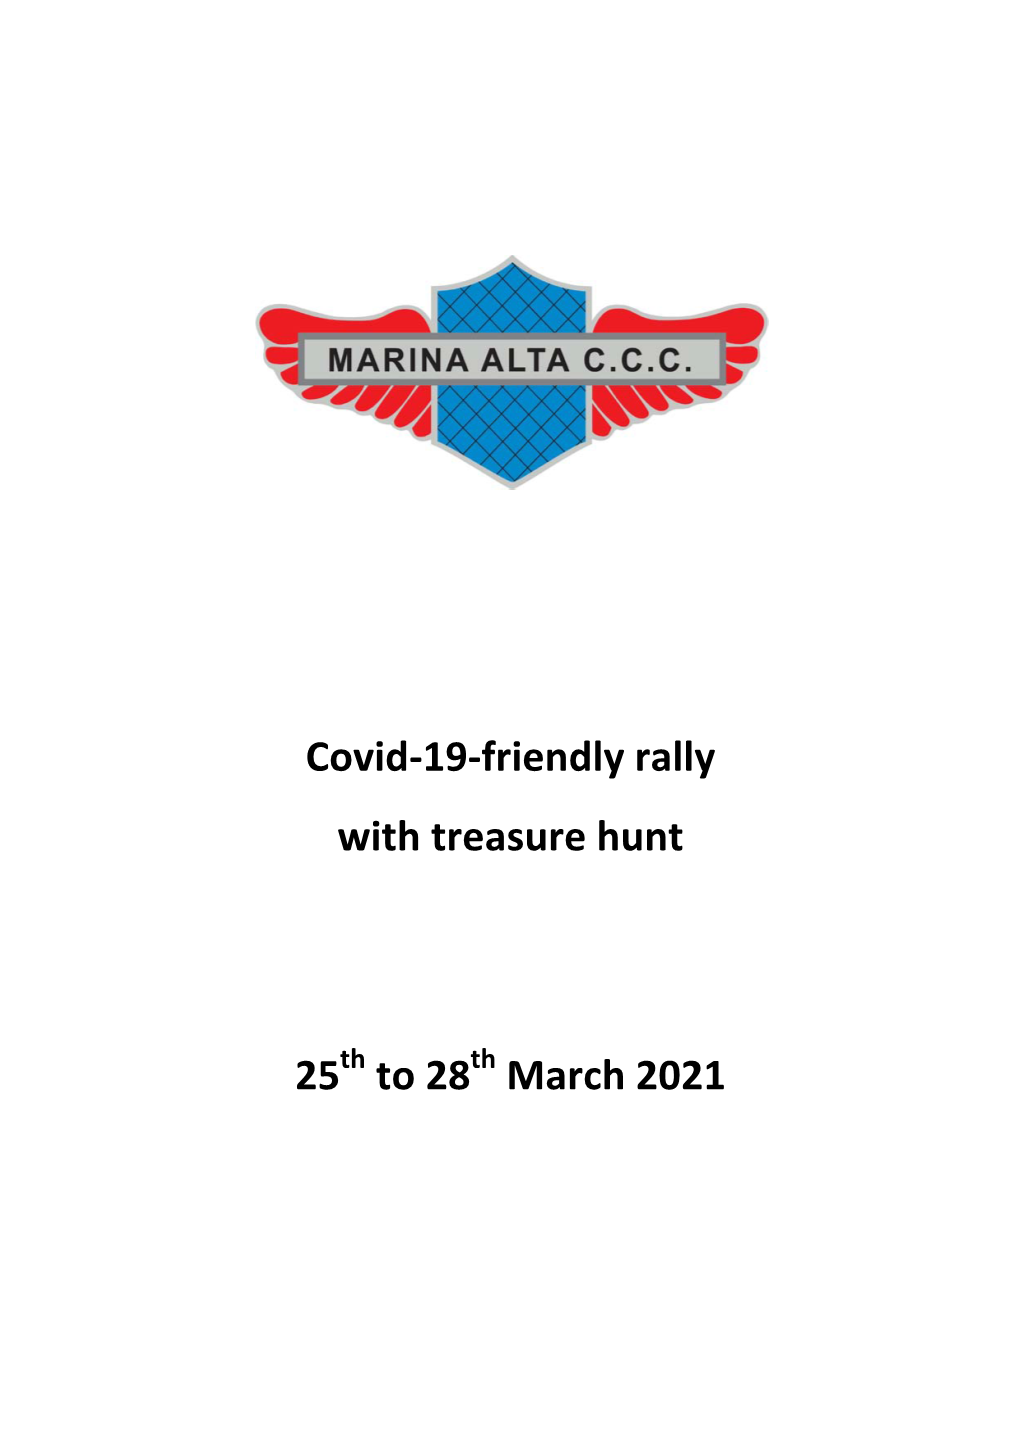 Covid-19-Friendly Rally with Treasure Hunt 25 to 28 March 2021